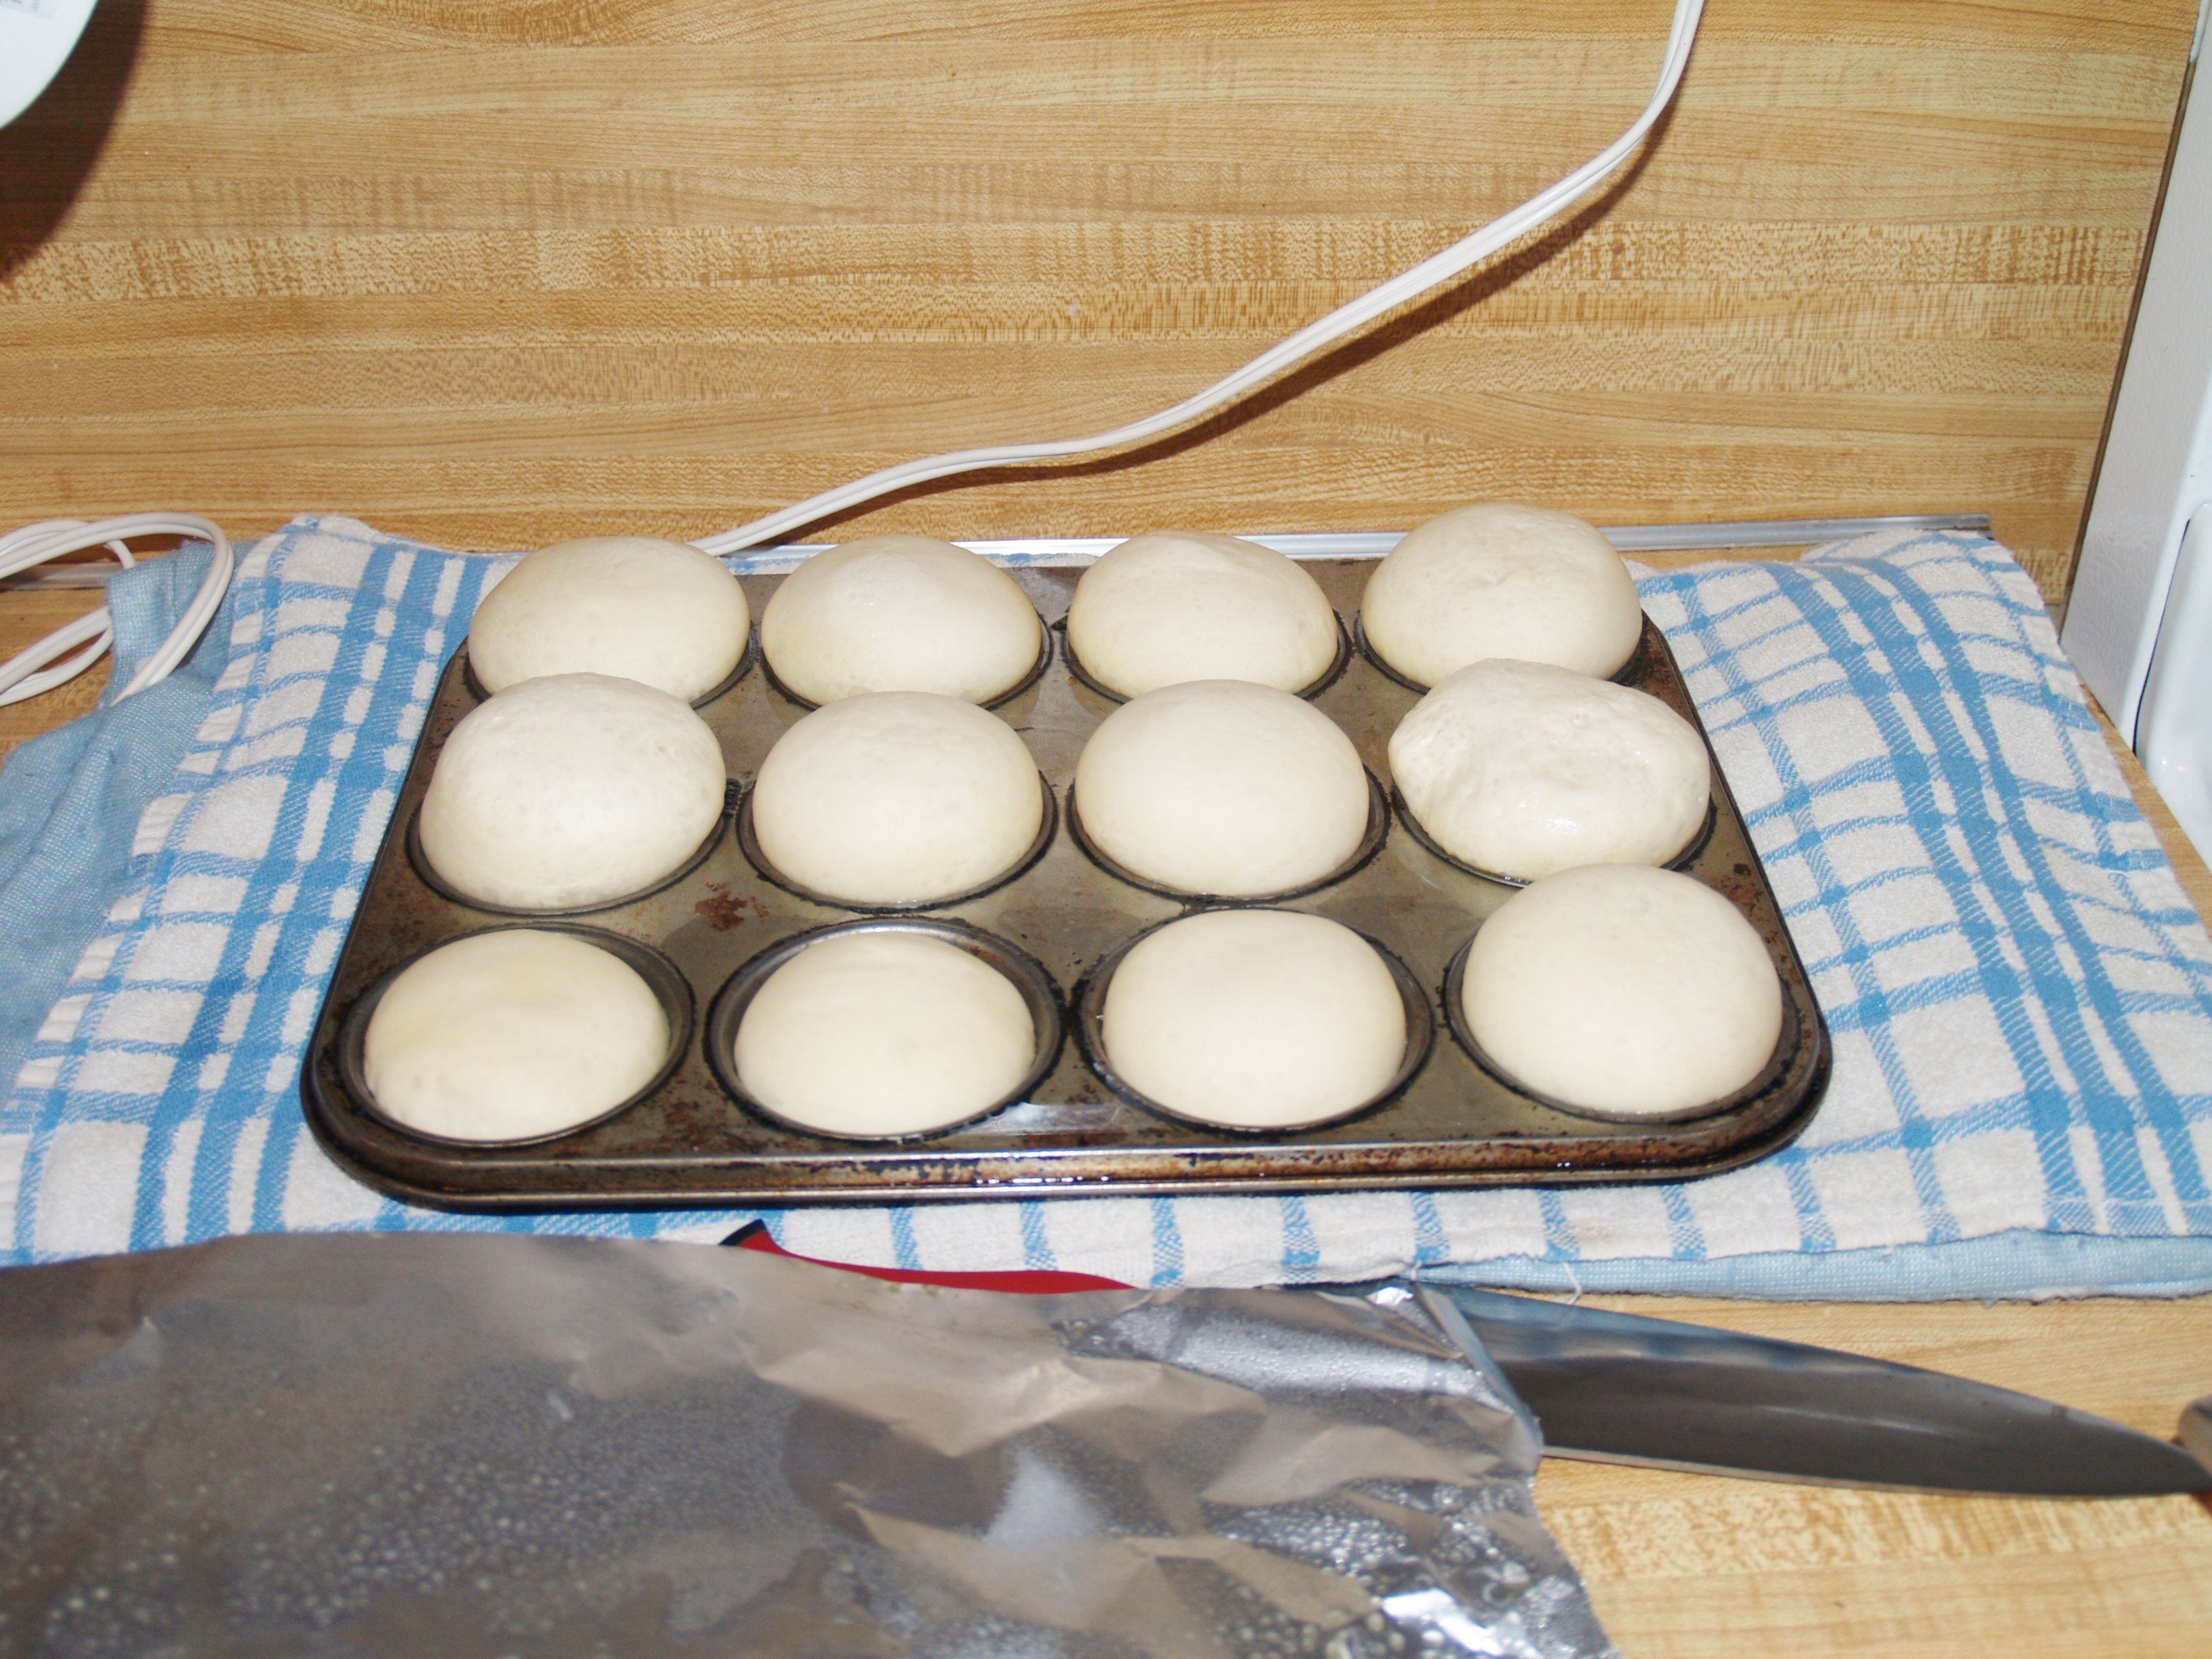 Cooking Rolls with a Heating Pad